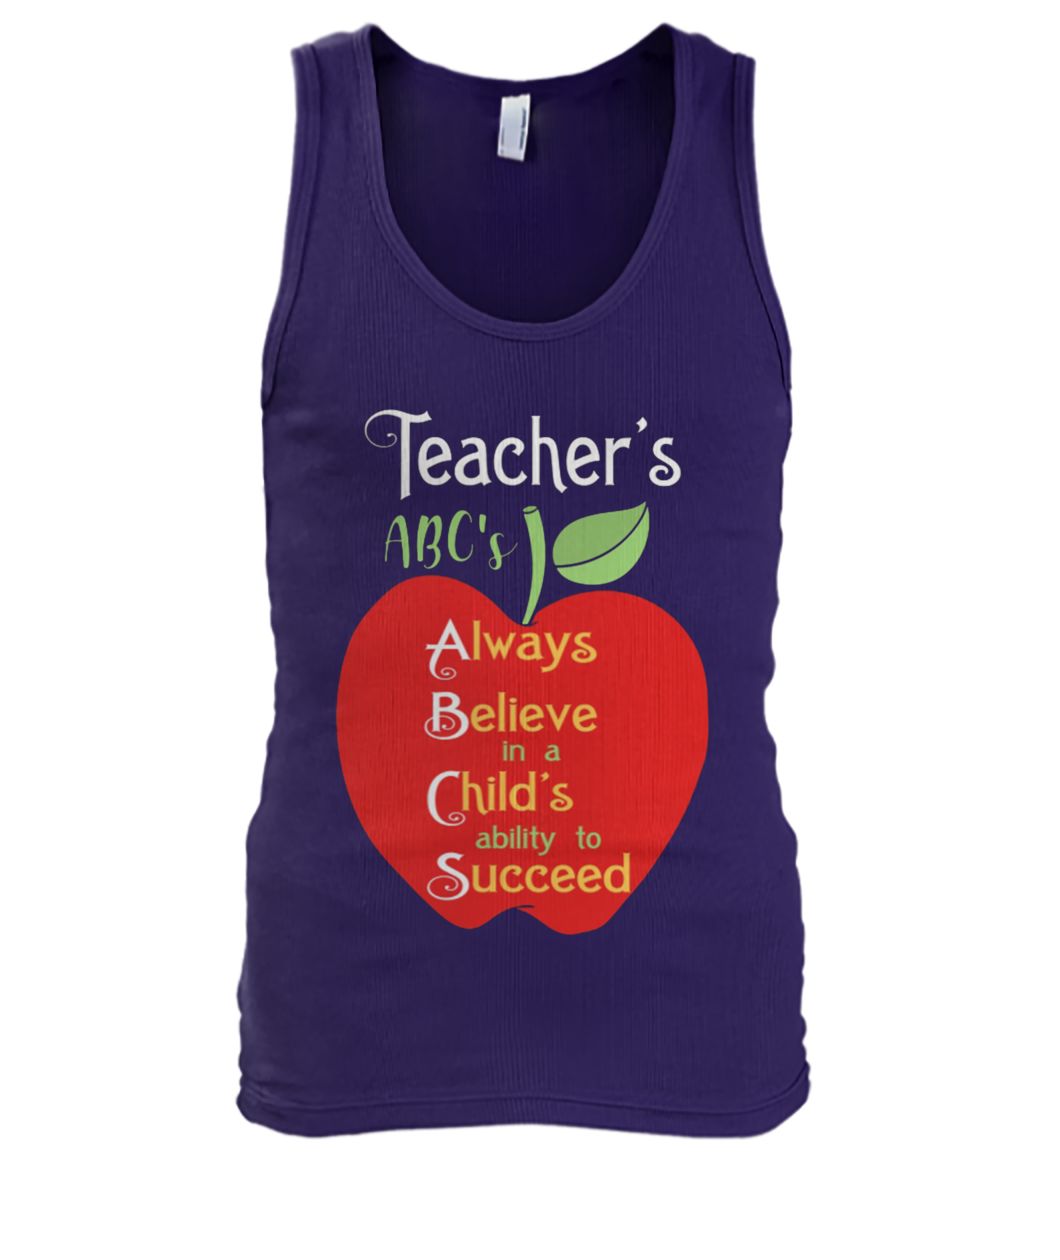 Apple teacher's abc's always believe in a child's ability to succeed men's tank top